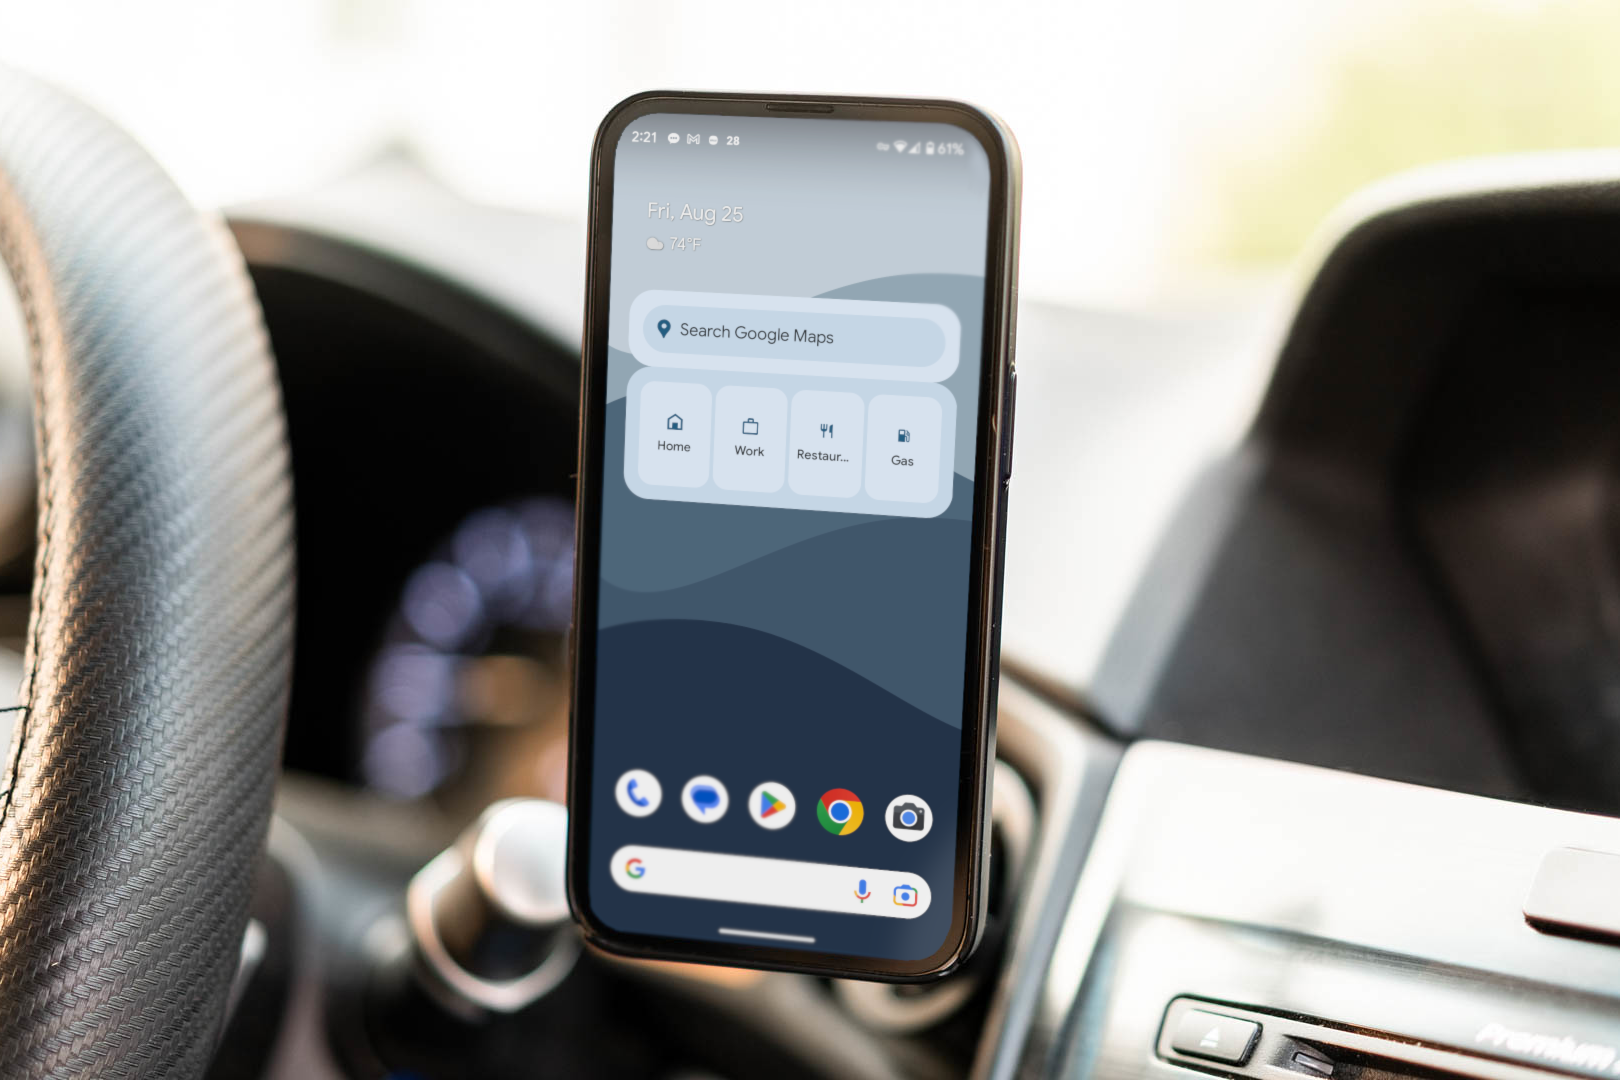 Android phone in car mount.